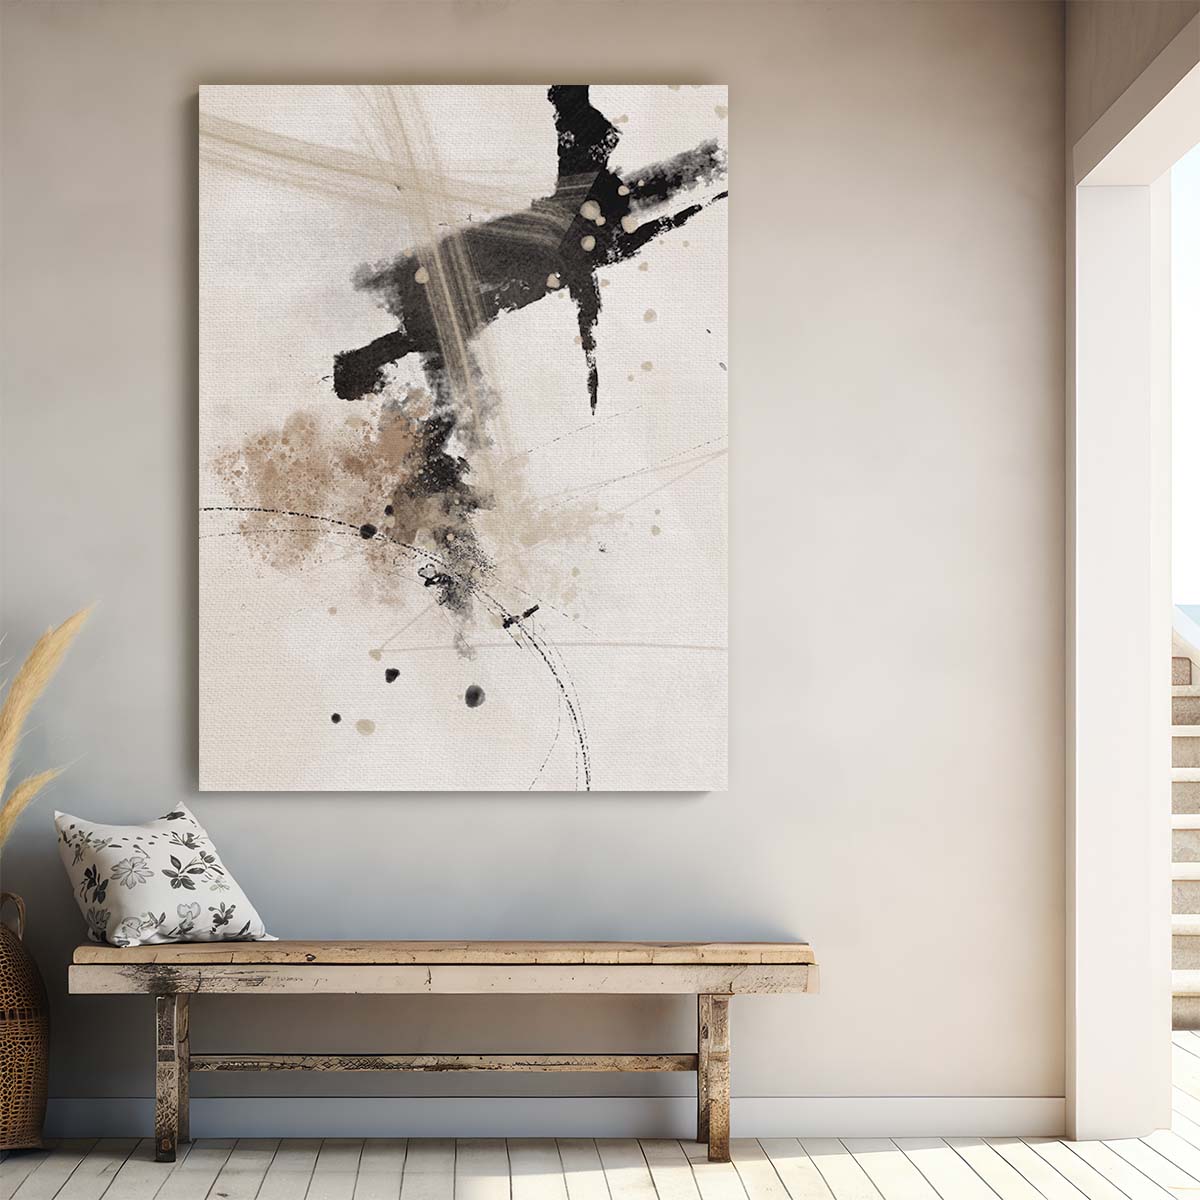 Abstract Beige & Black Illustration Painting with Geometric Splash Pattern by Luxuriance Designs, made in USA